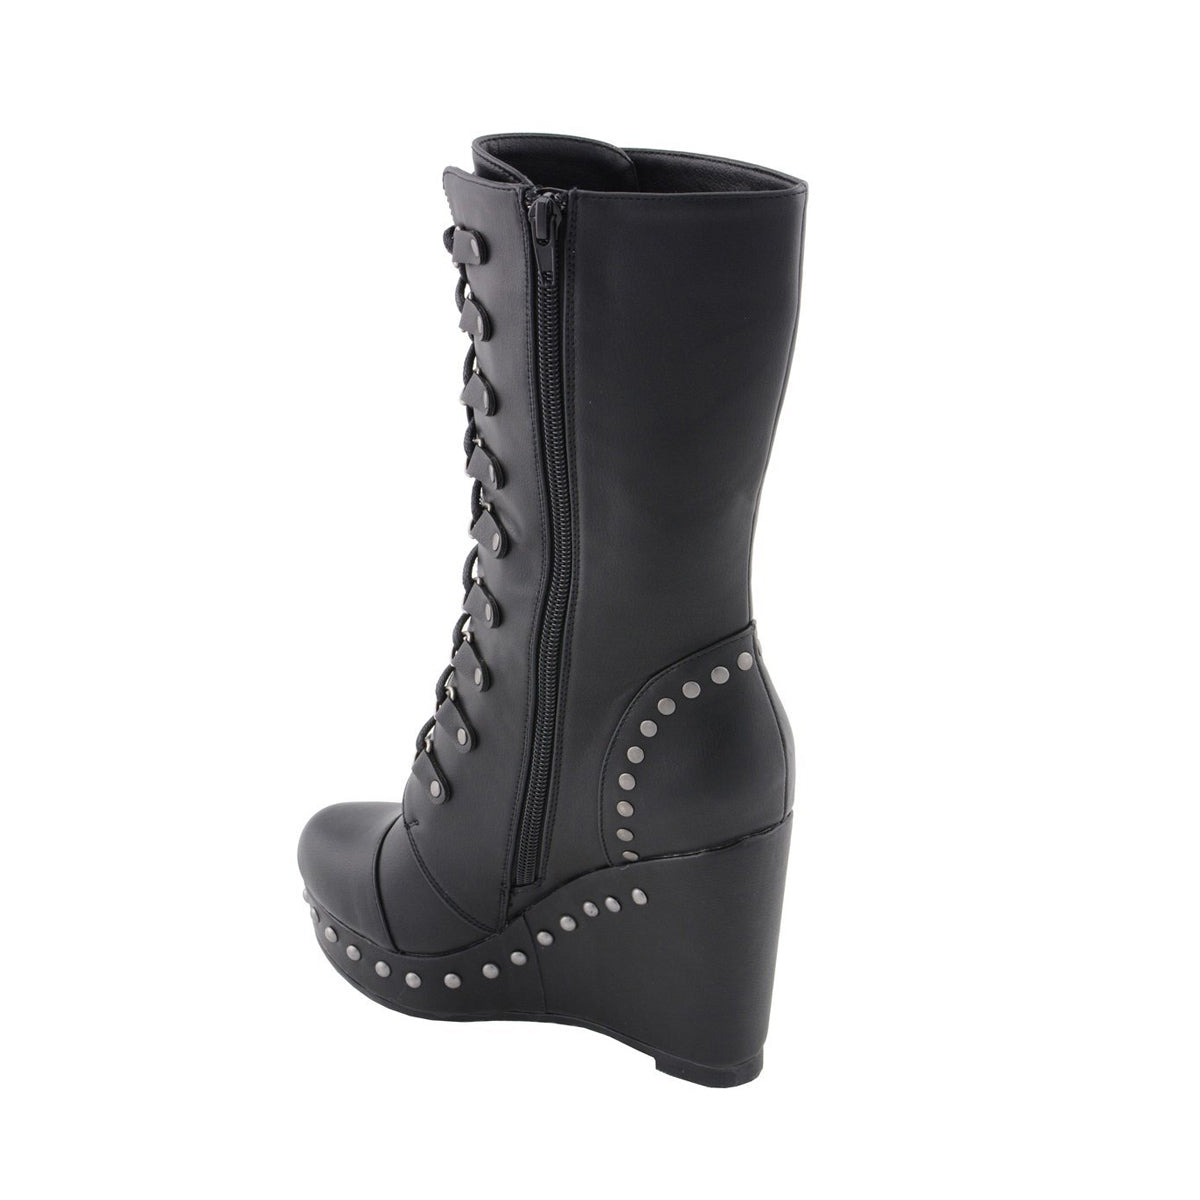 Womens Black Lace-Up Boots with Platform Wedge